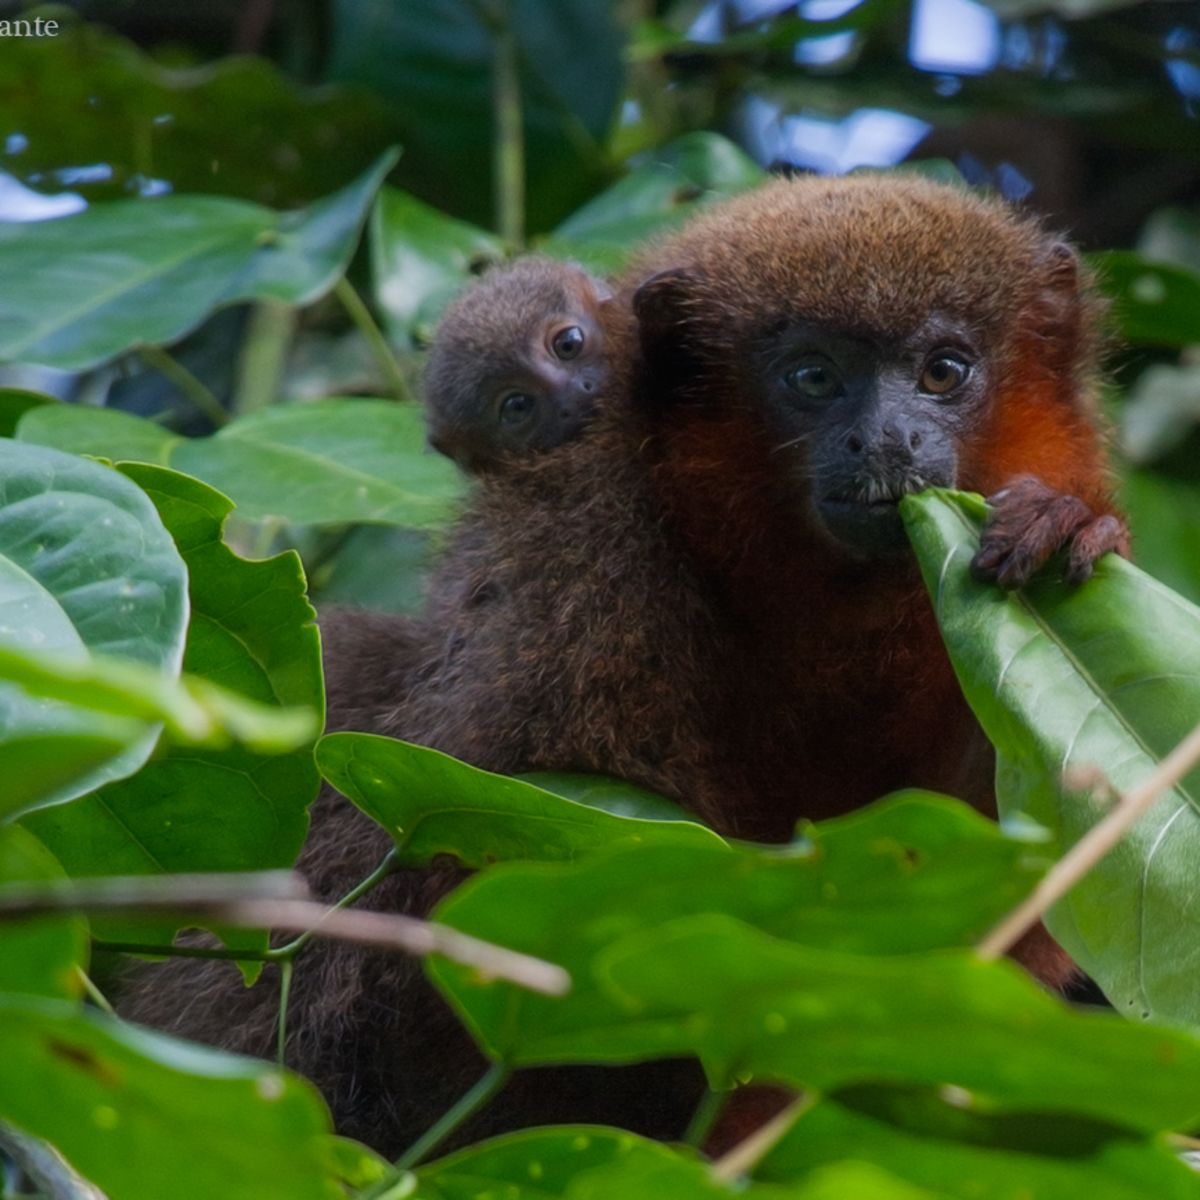 Monkey and infant in Peruvian rainforest